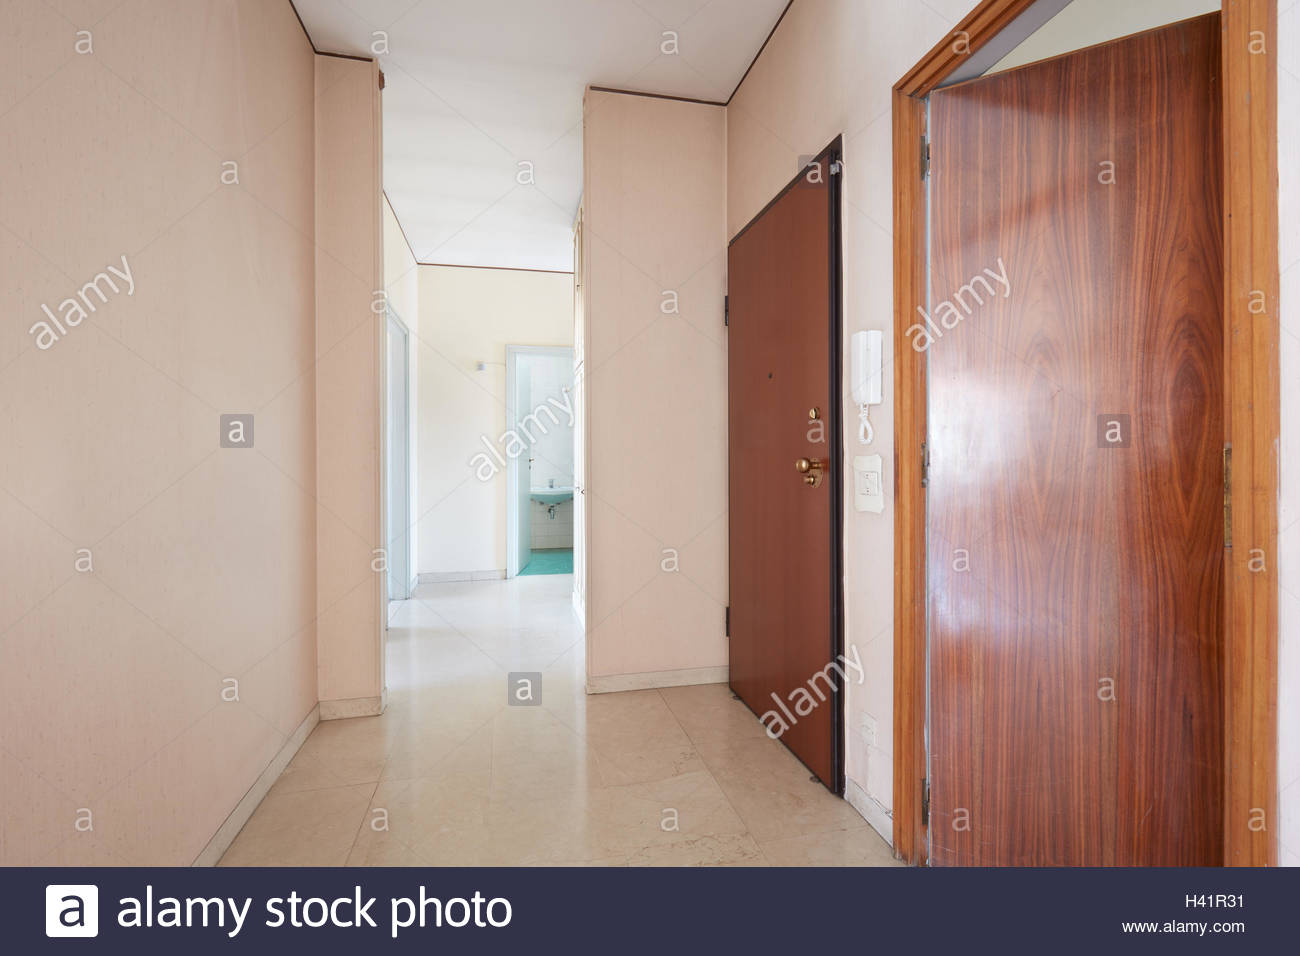 corridor in empty apartment with marble floor perspective H41R31